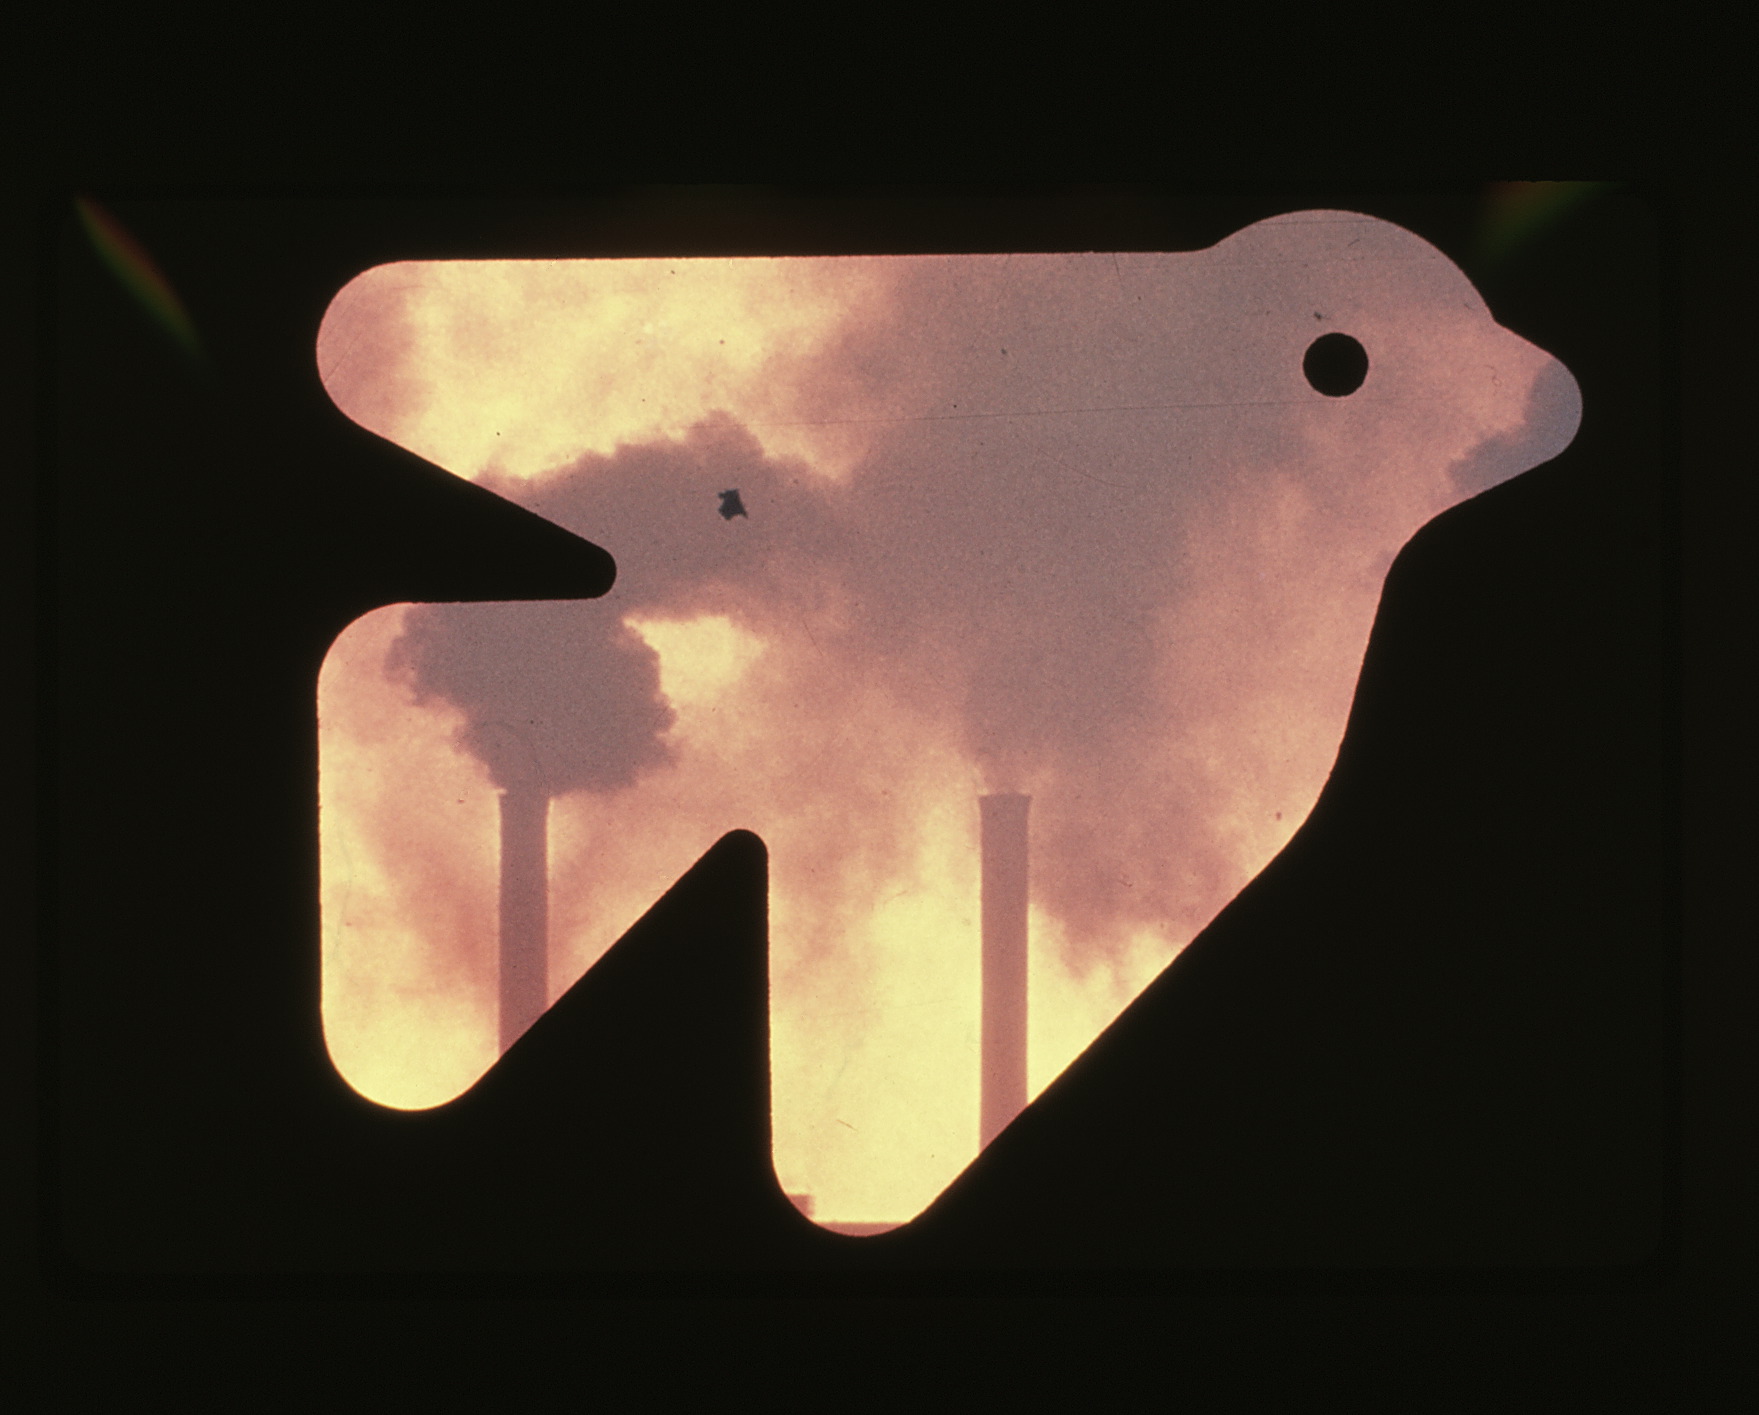 Pictogram of bird, with smoggy sky